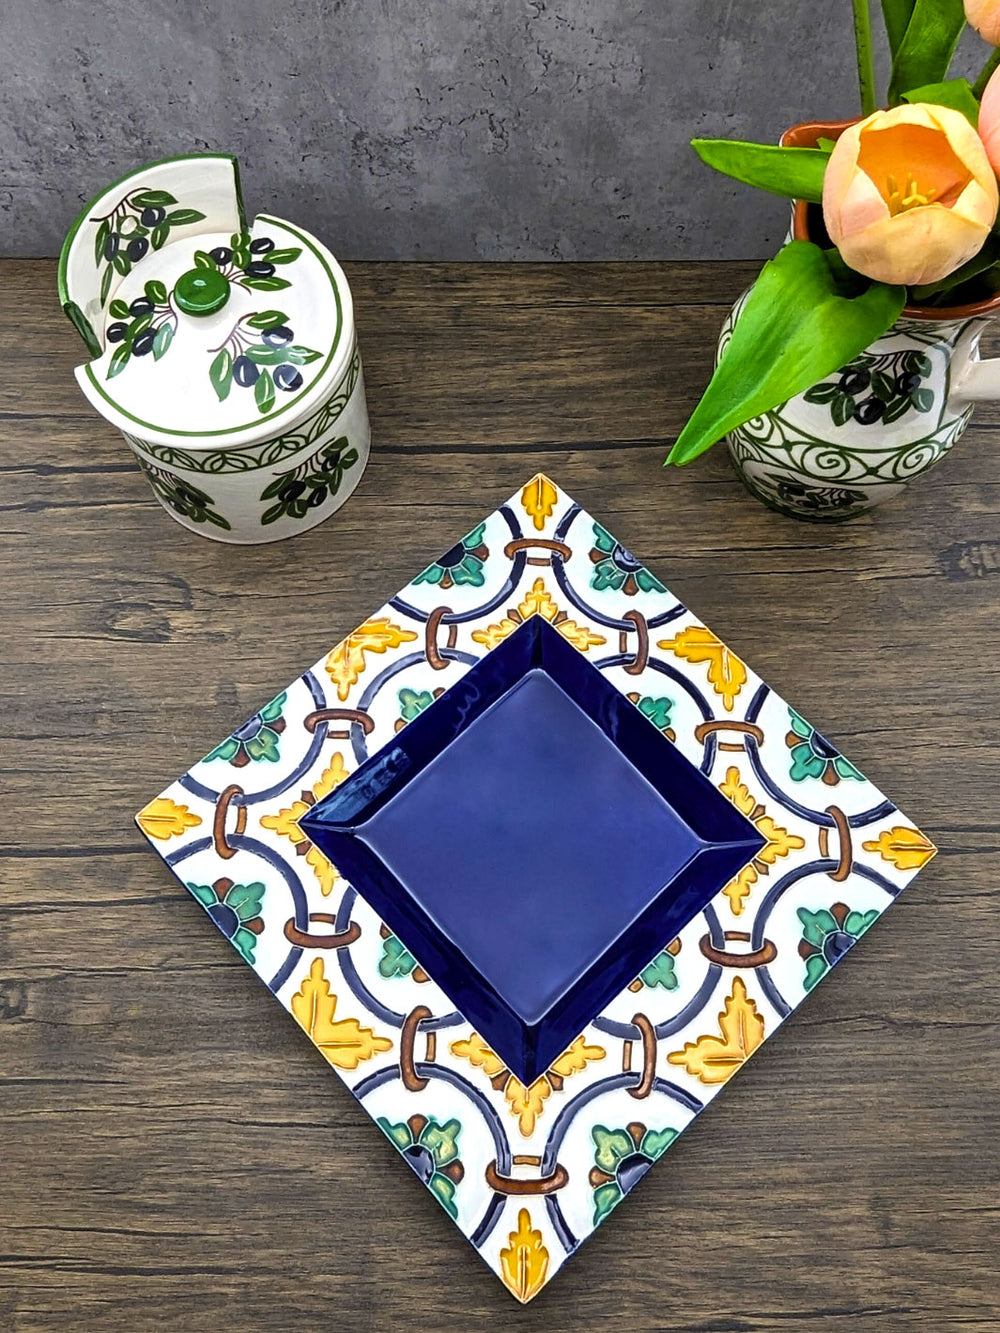 Handcrafted Portuguese Tiles Large Ceramic Square Plate